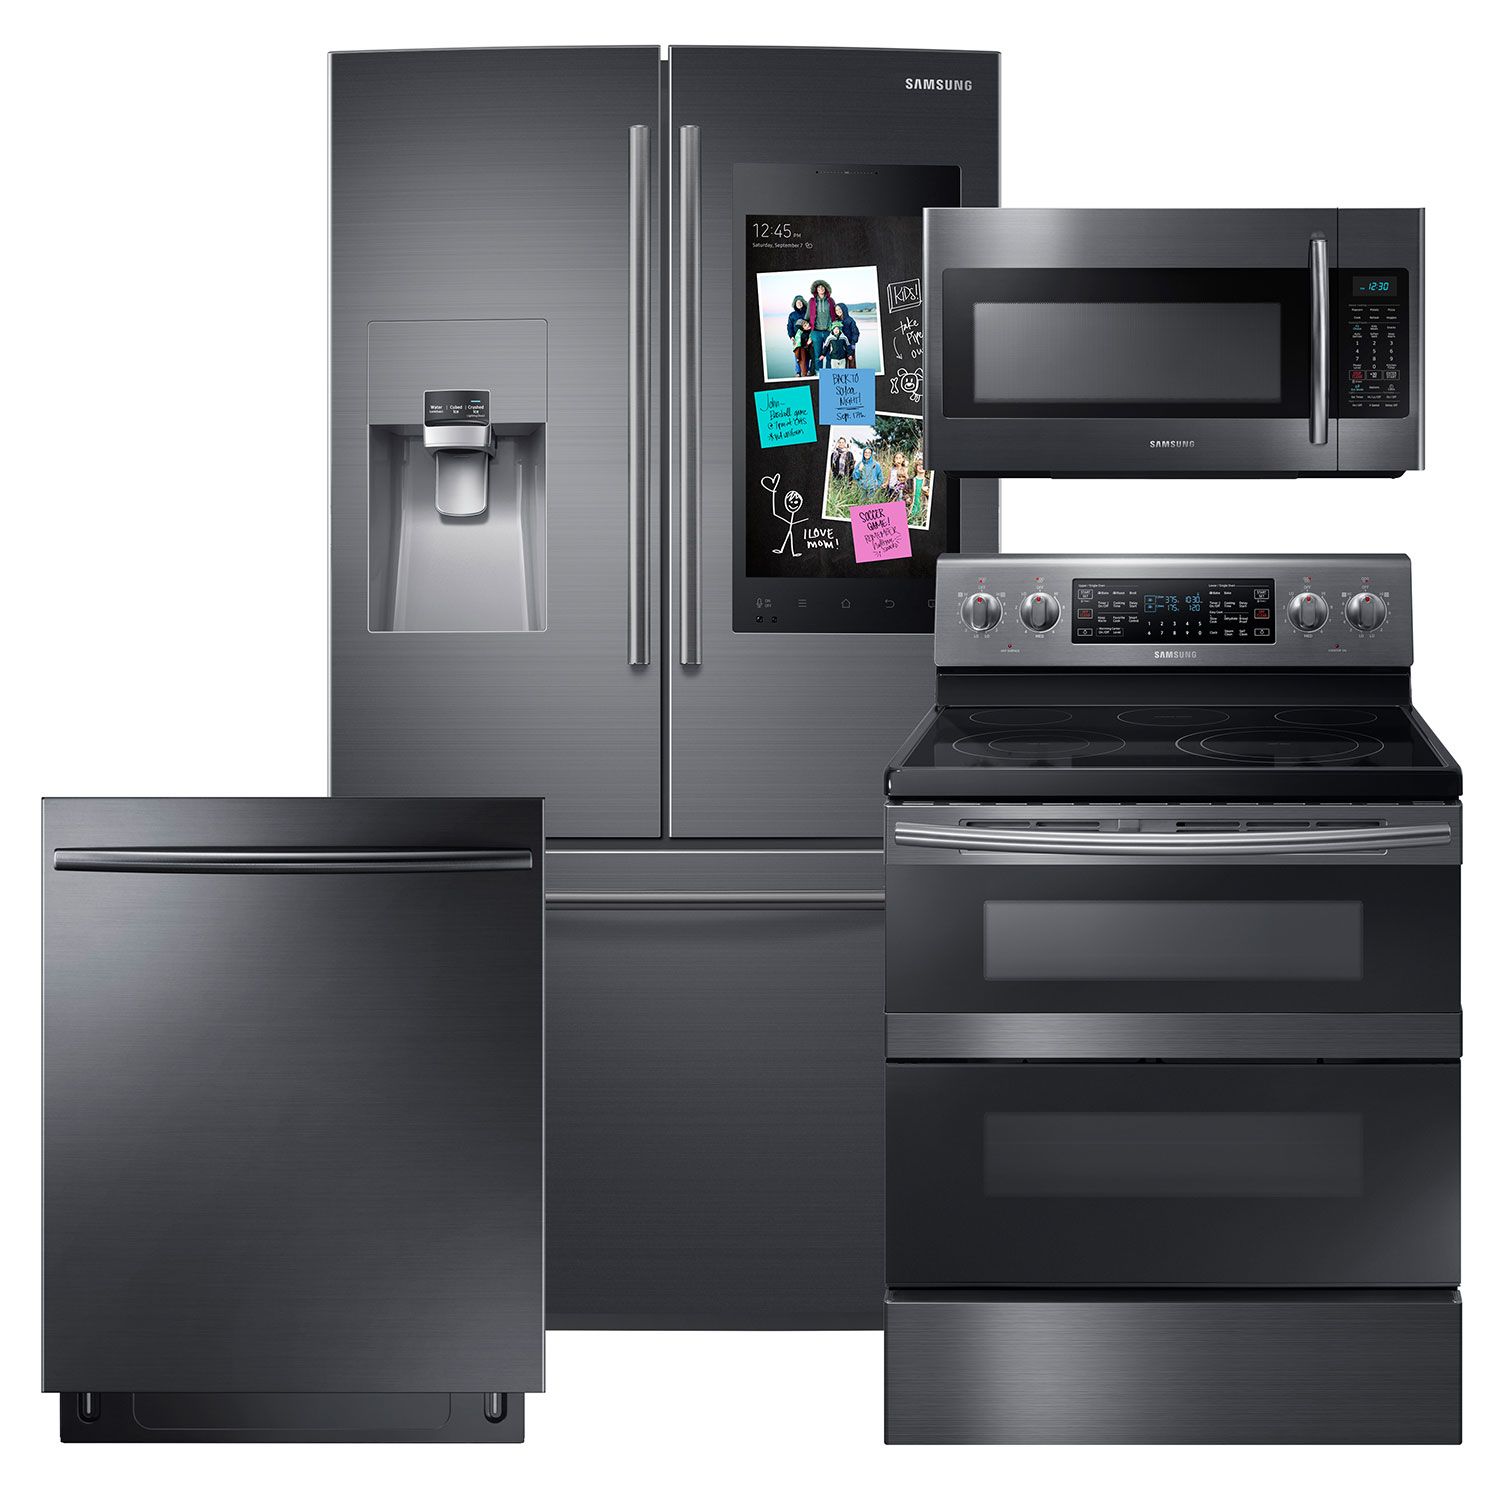 SAMSUNG Family Hub Refrigerator, Flex Duo Electric Range, Microwave, and Dishwasher Package in Black Stainless Steel Finish